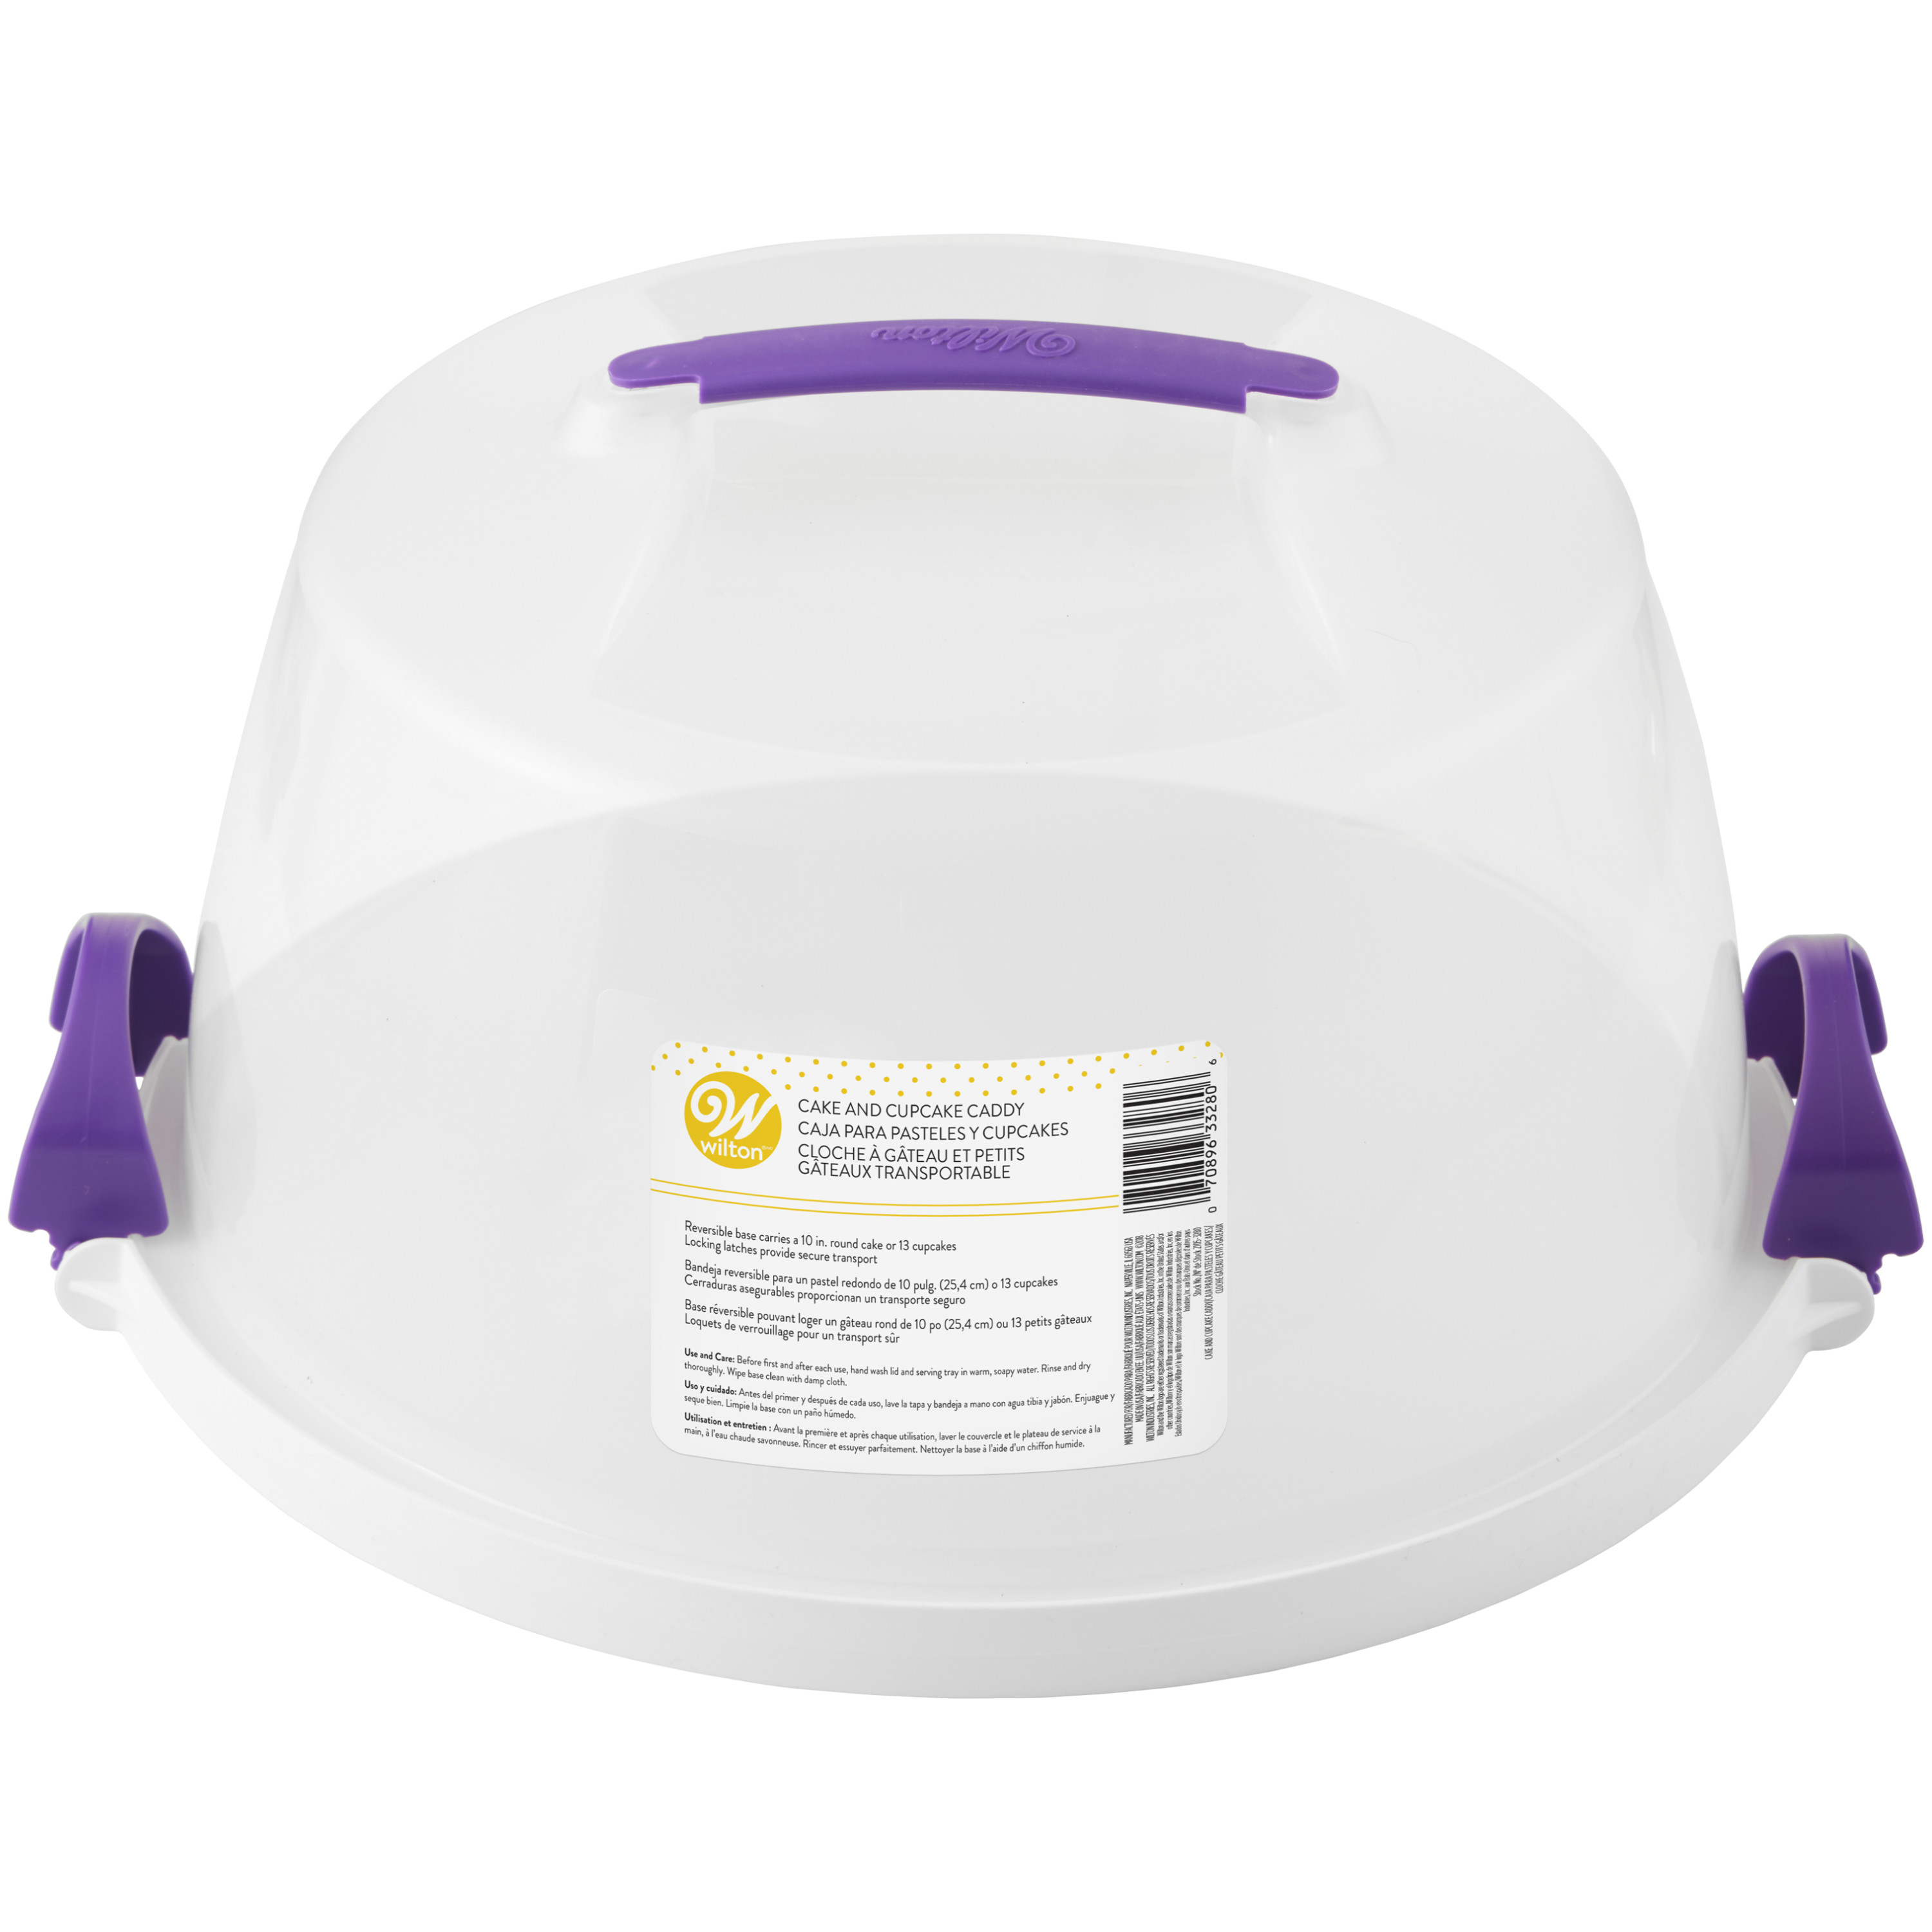 Wilton Cake and Cupcake Carrier, Fits 10 inch Cake or 13 Standard Cupcakes, 2.07 oz. - image 2 of 5